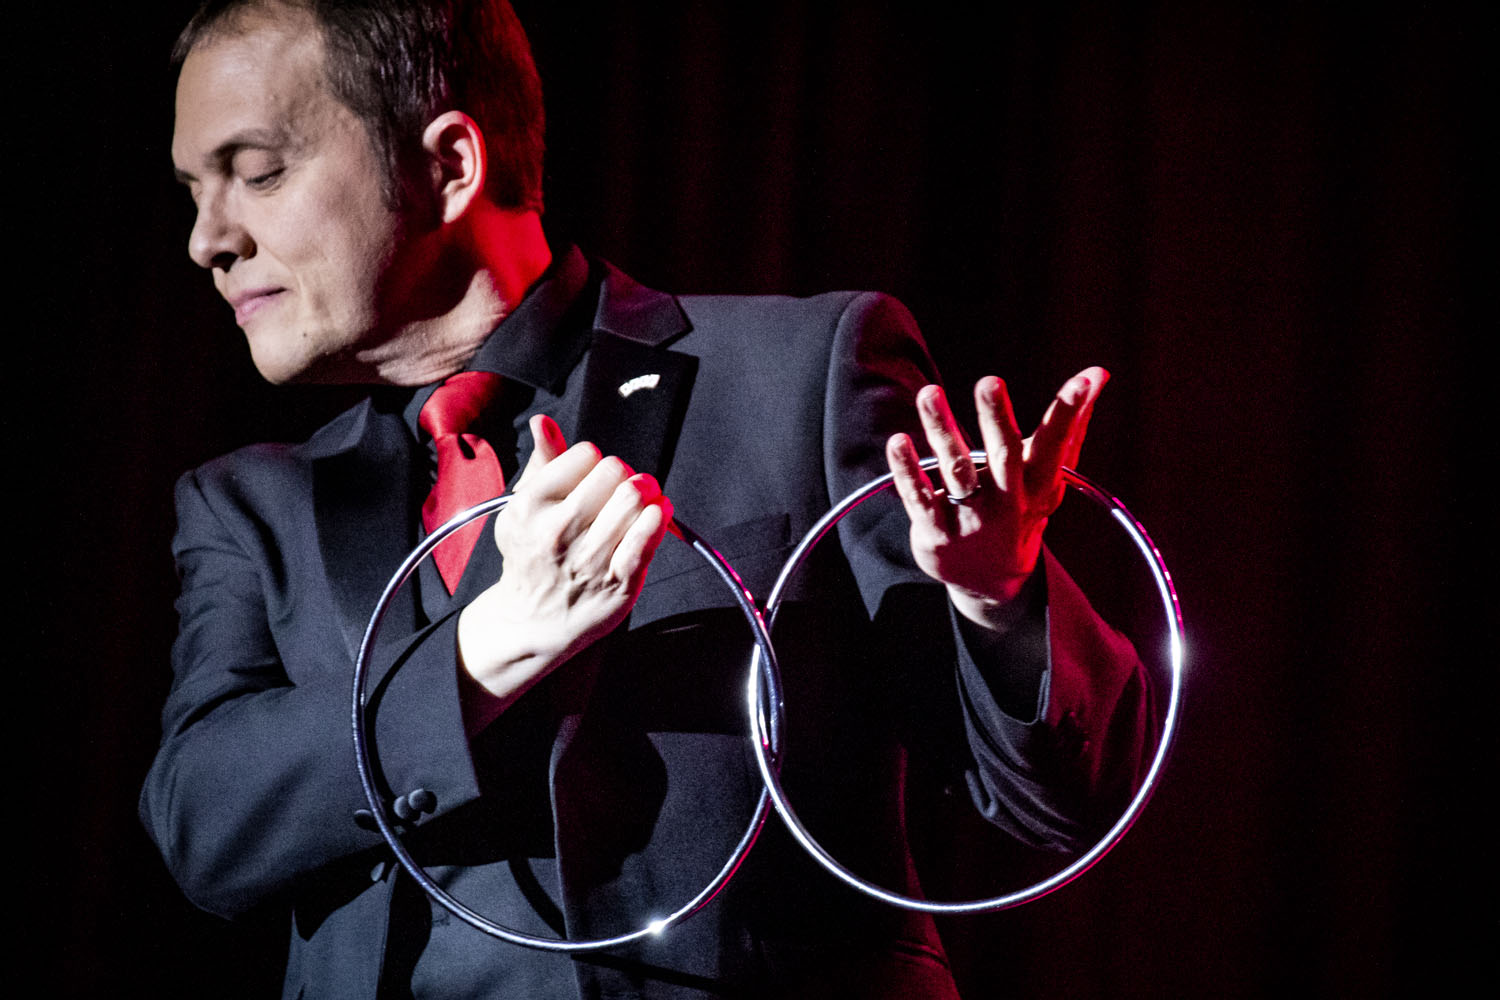 The French magician Boris Wild on stage performing the famous trick of the linking rings